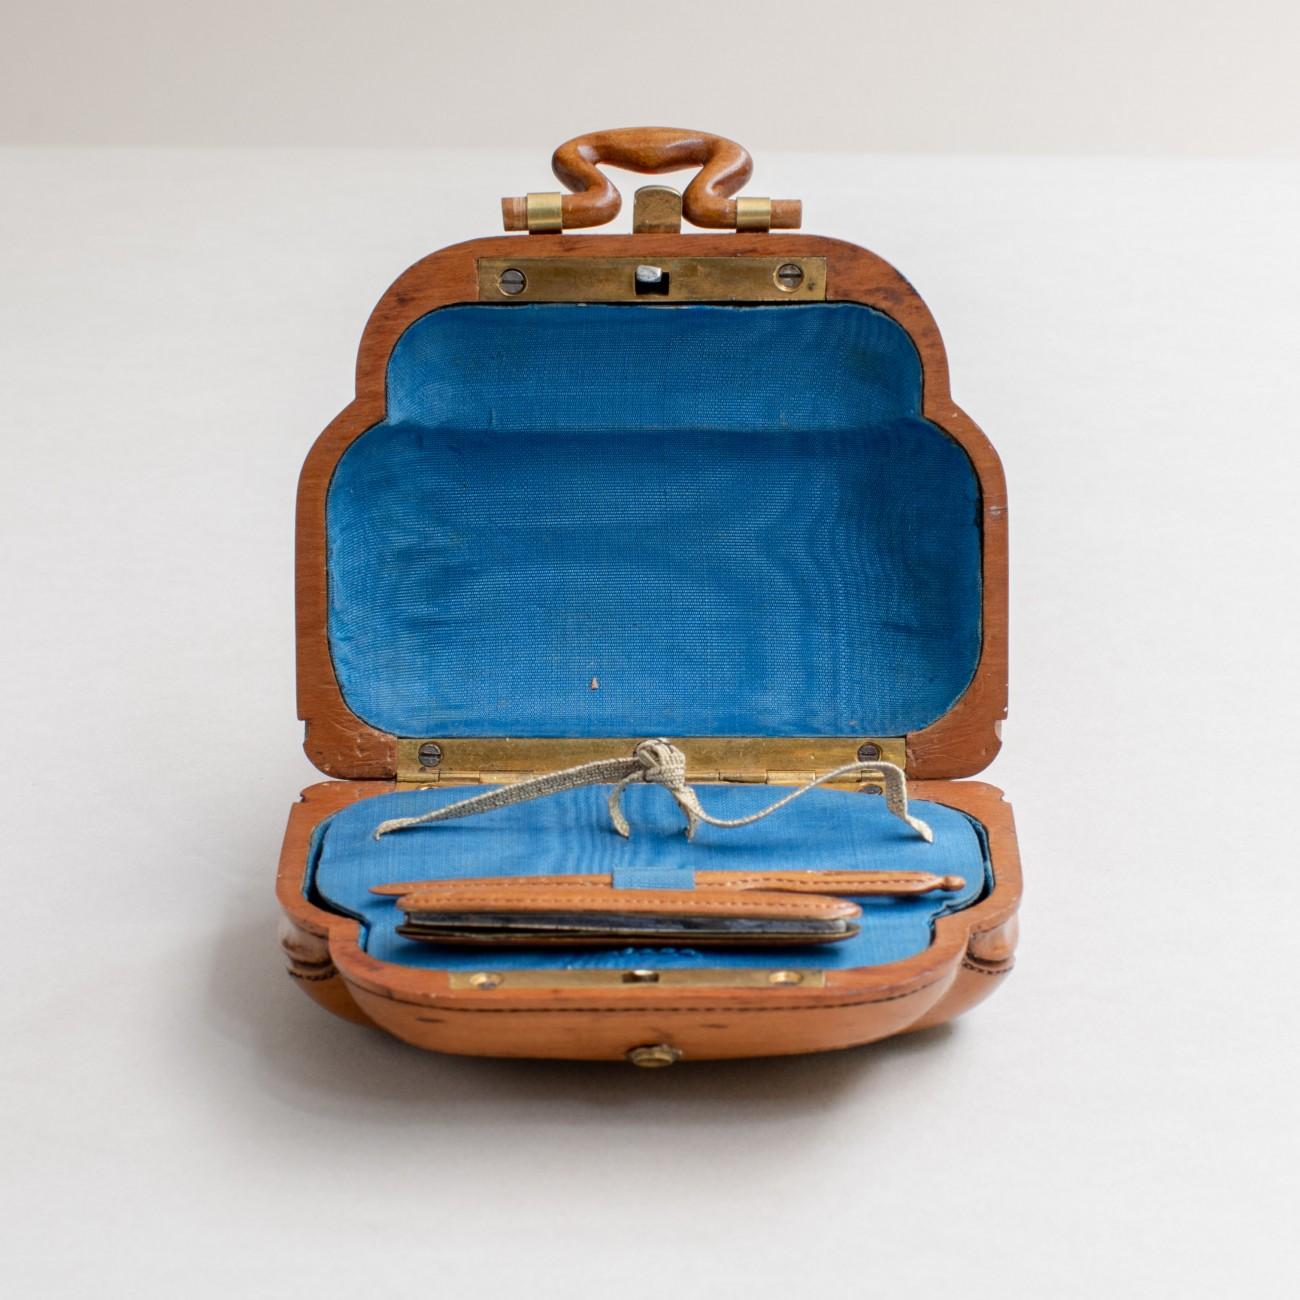 Intricately carved in fruitwood, modelled as a miniature leather travel bag, circa 1900. The interior has the original blue silk lining. This spectacular miniature was originally made as a sewing kit.

Dimensions: 9 cm/3½ inches (length) x 4 cm/1½